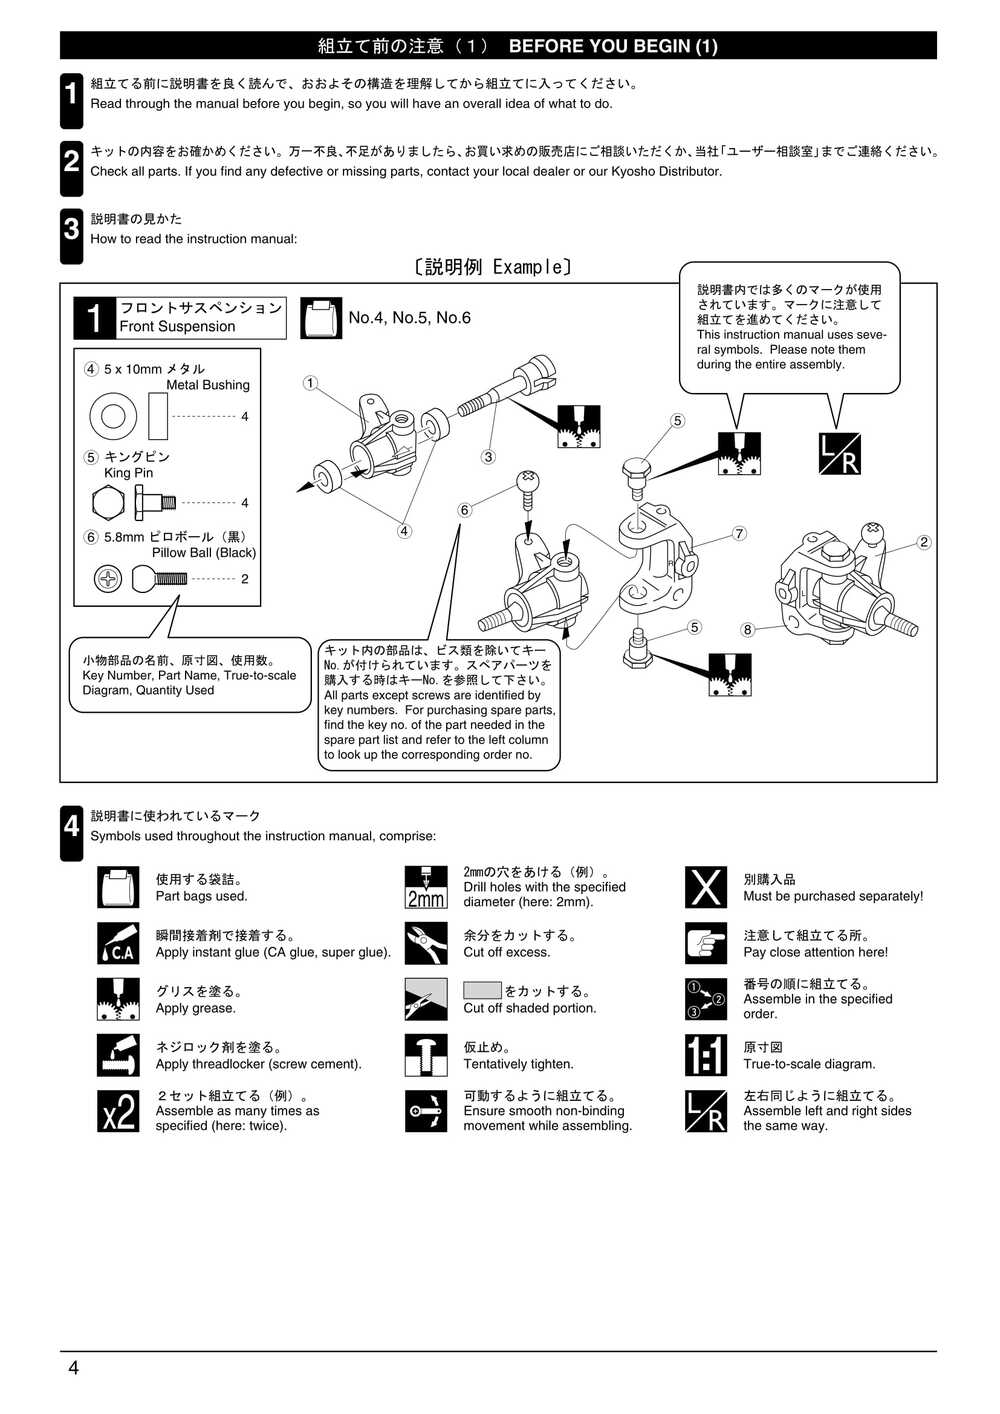 Kyosho - 31221 - Mad-Force - Manual - Page 04